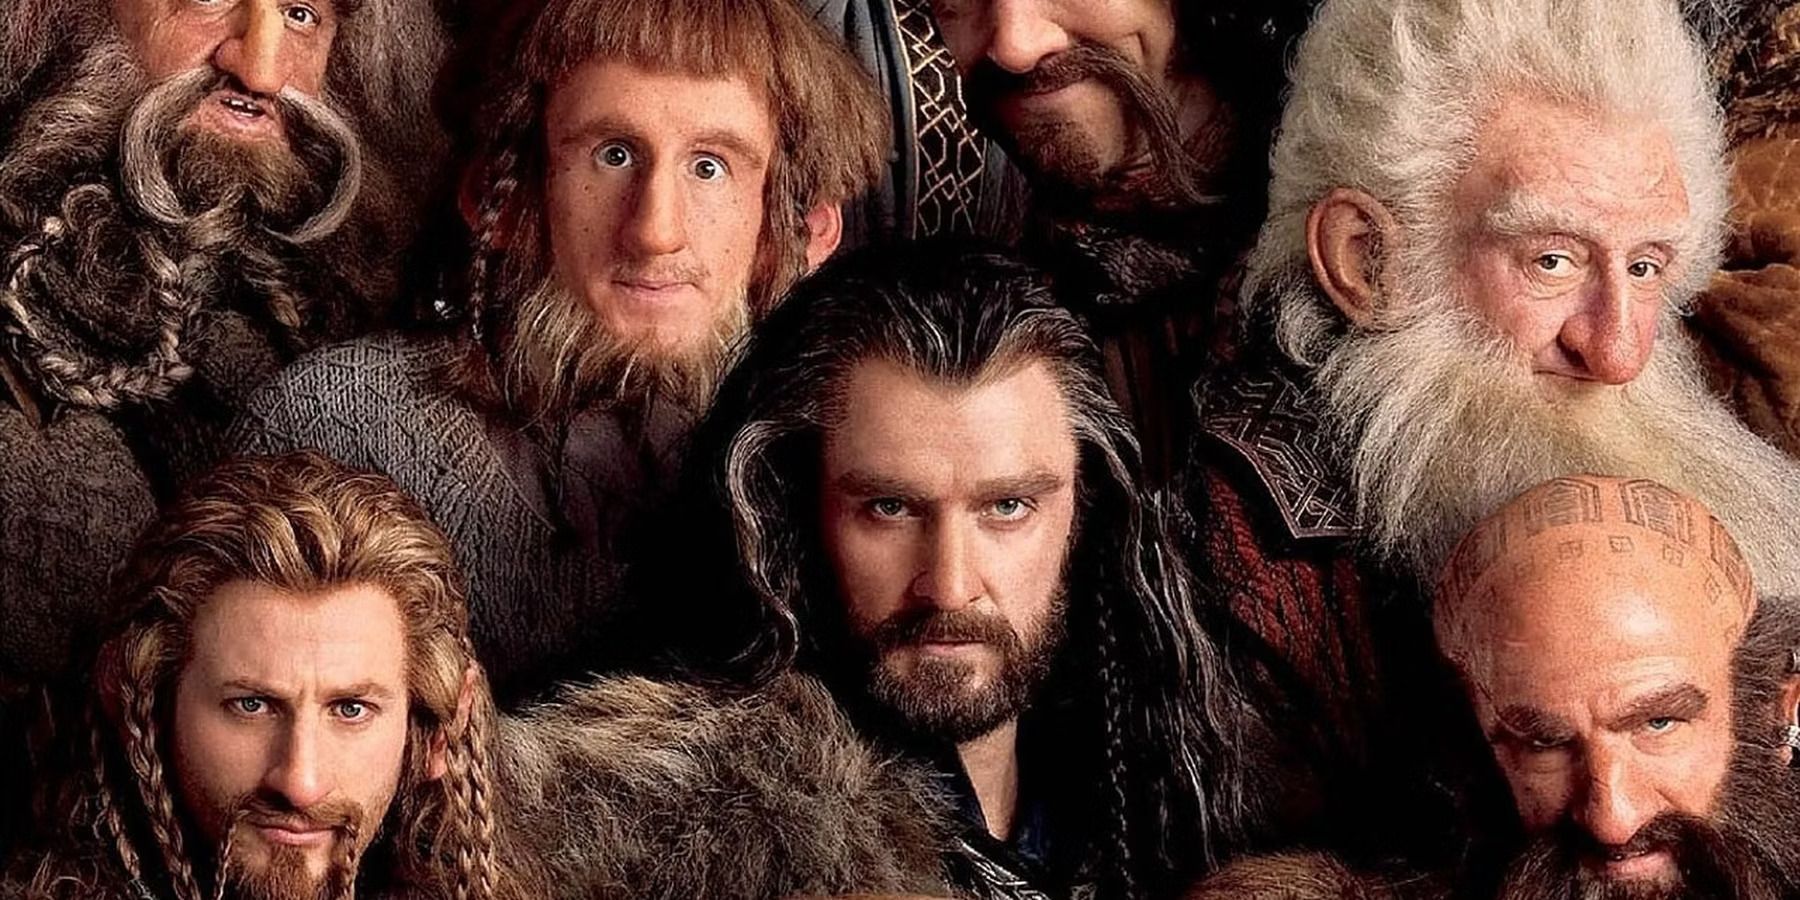 Dwarves From The Lord Of The Rings Universe